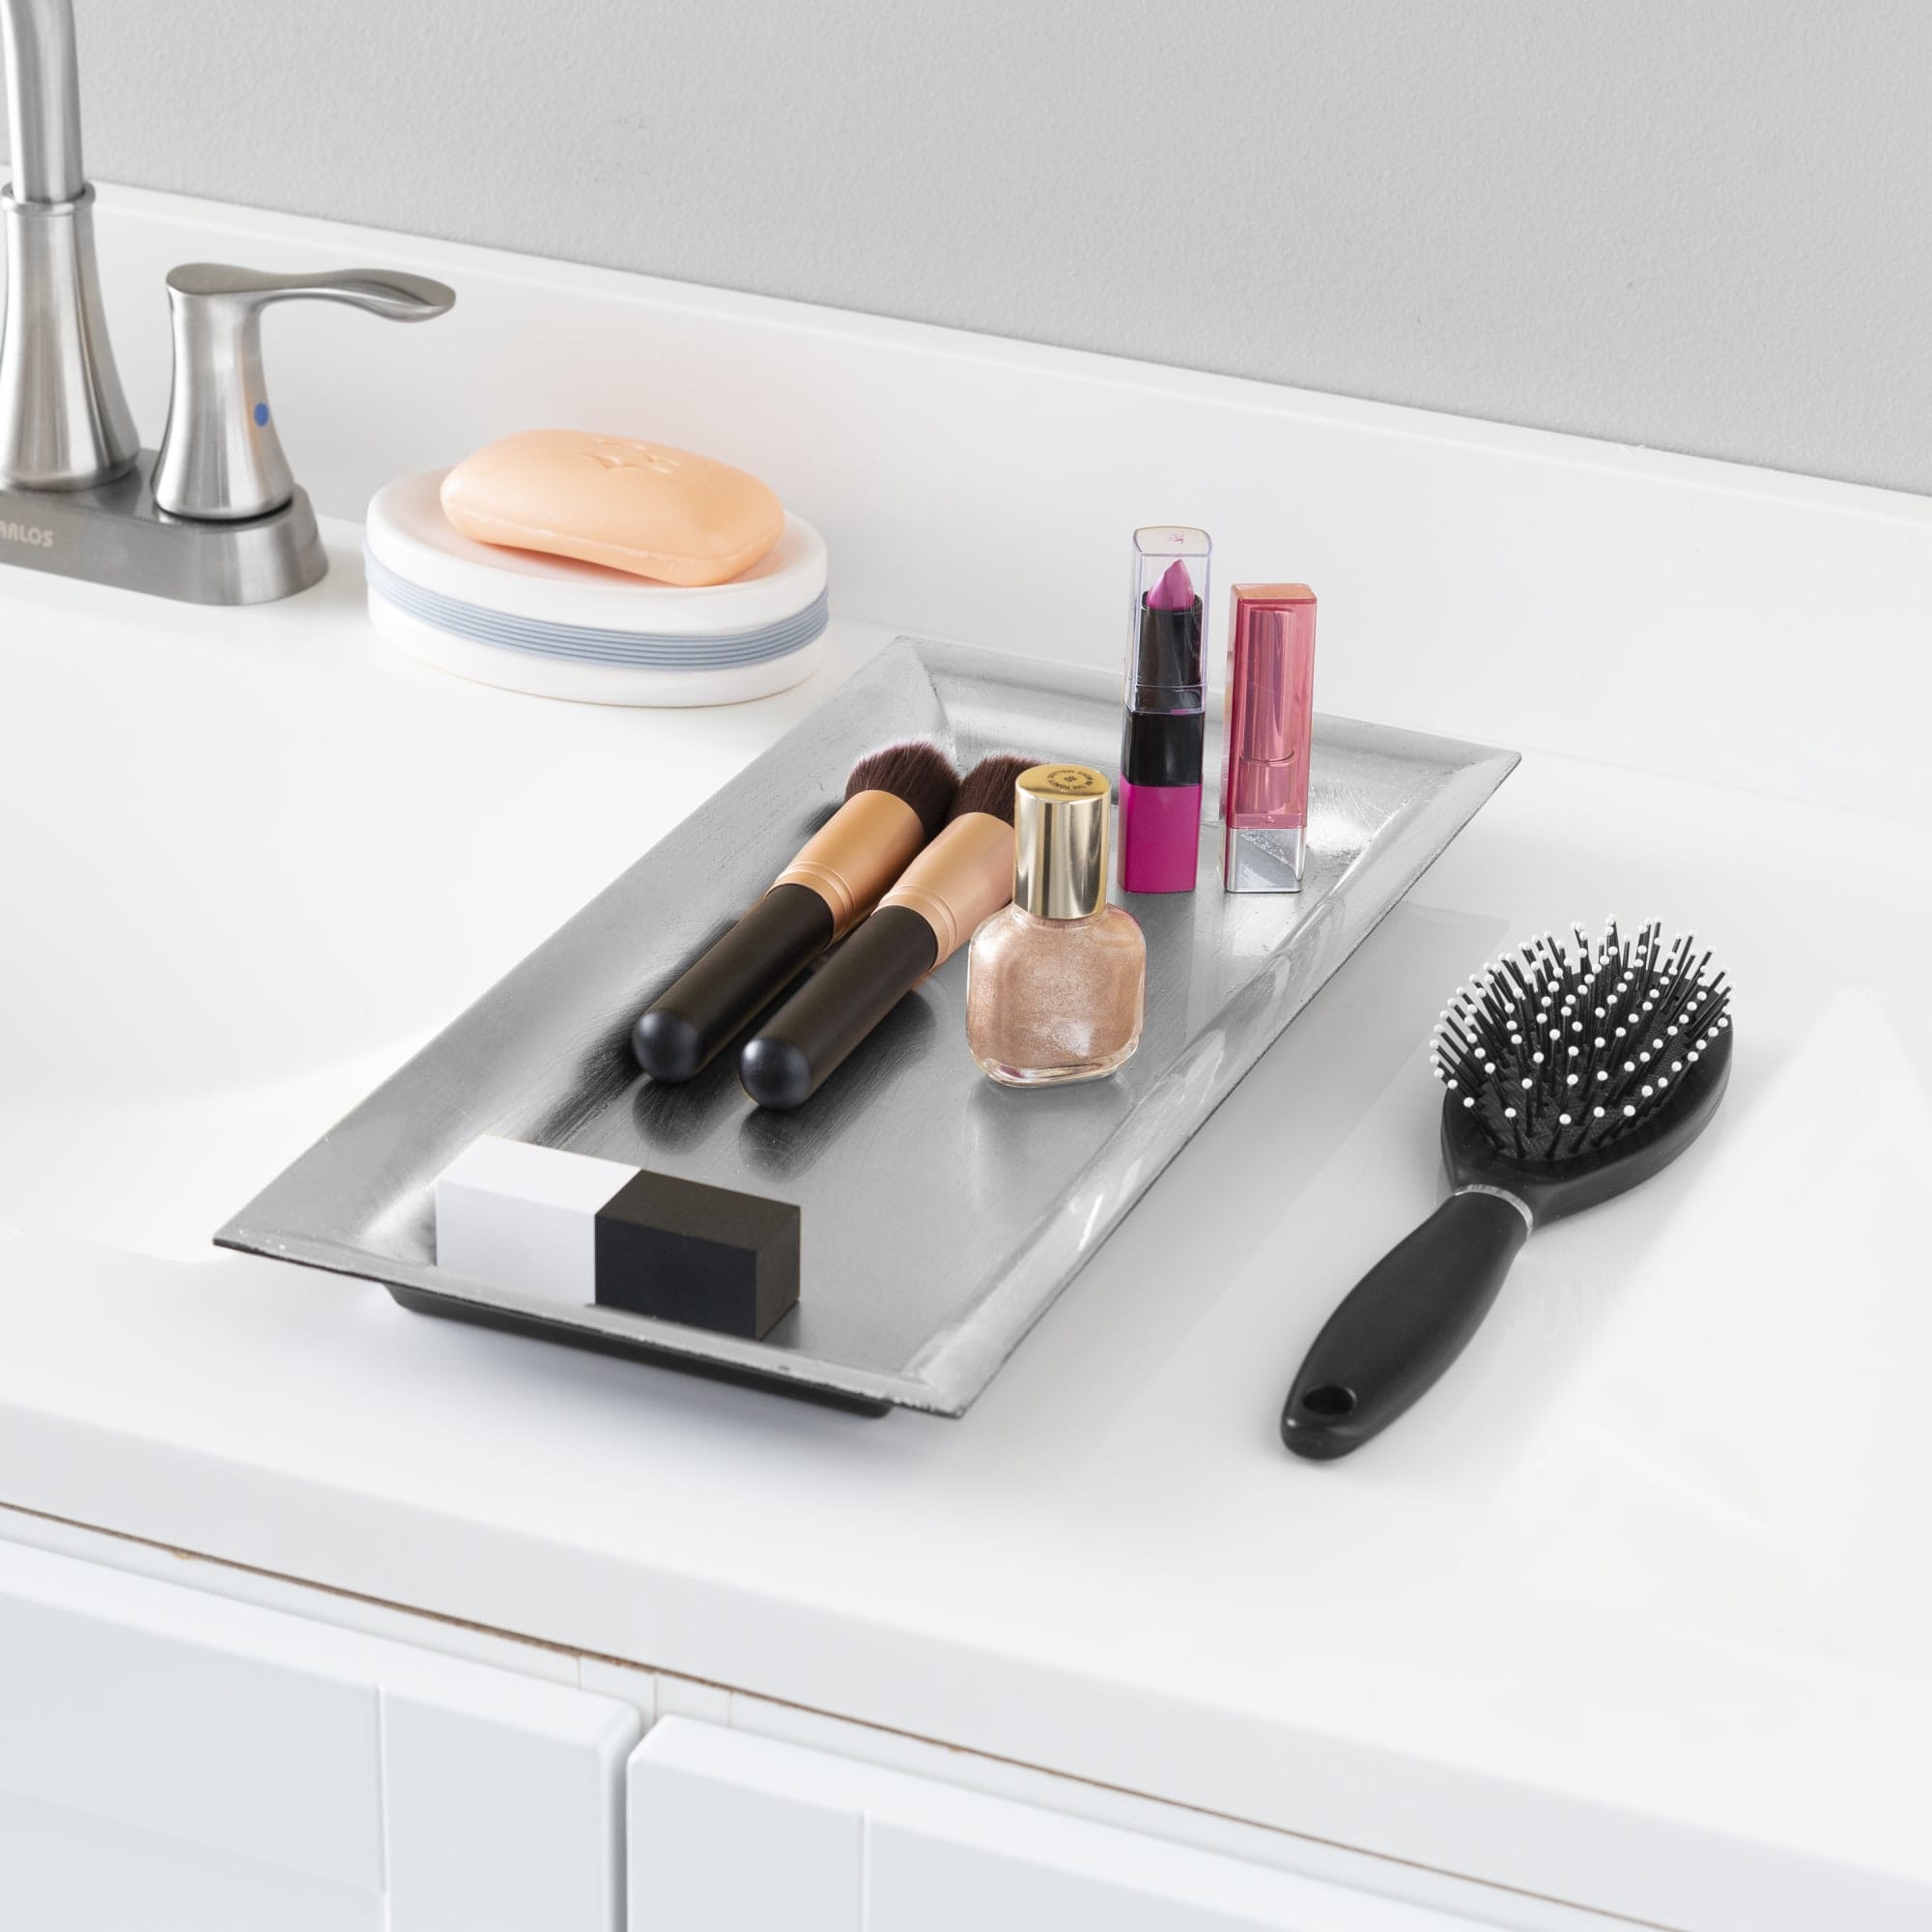 Home Basics Plastic Vanity Tray, Silver $4.00 EACH, CASE PACK OF 12